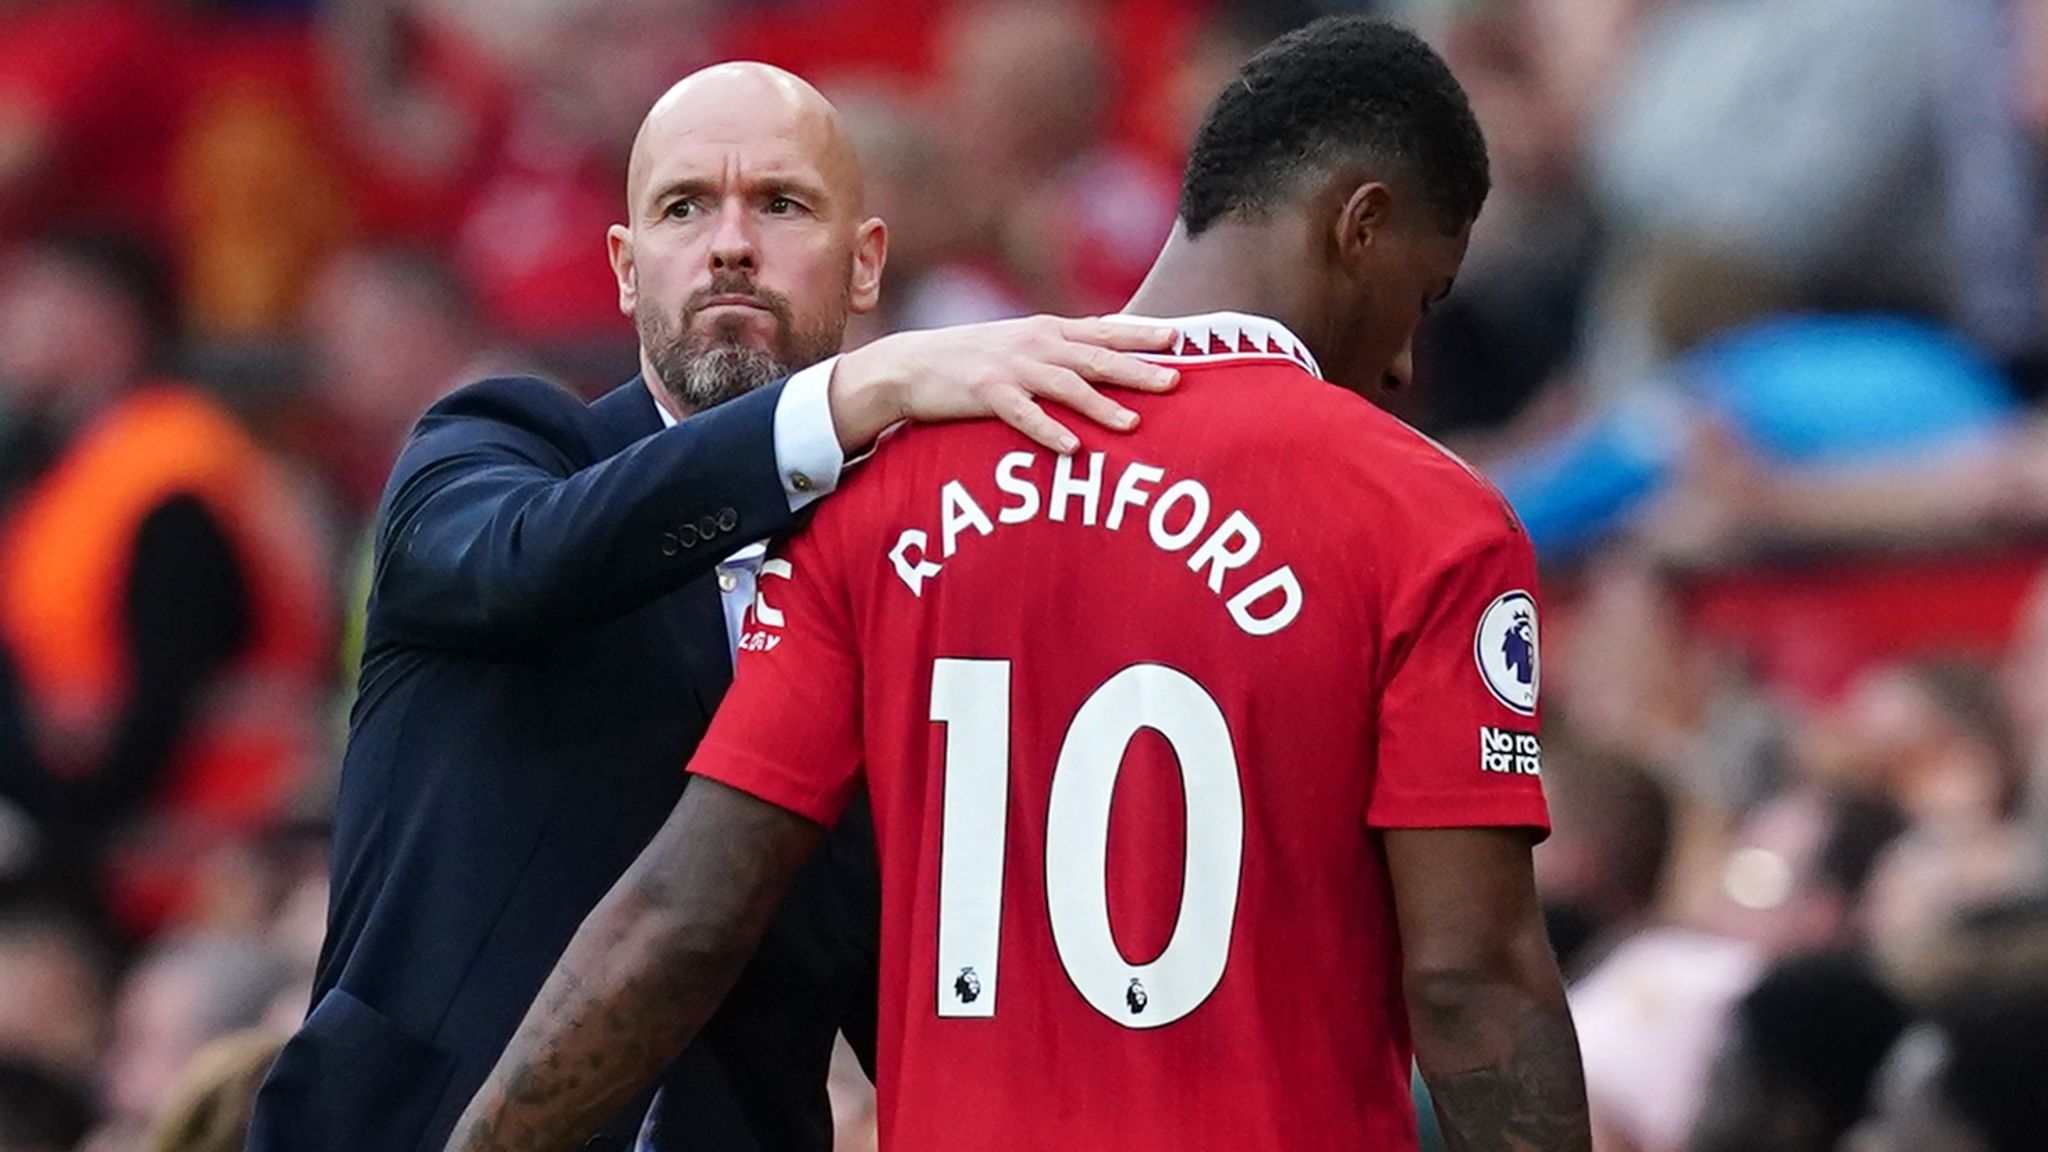 MU Manager Ten Hag Comments On Rashford's Party